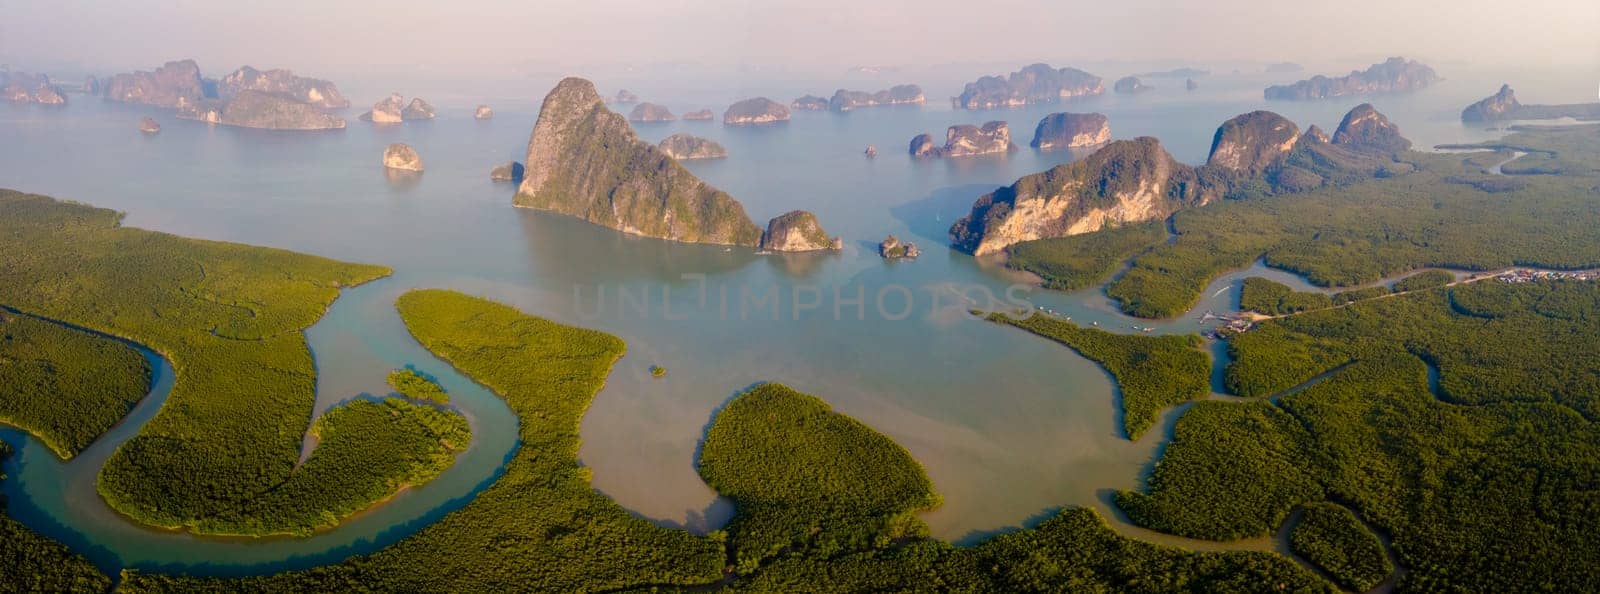 sunrise at Sametnangshe viewpoint of mountains in Phangnga Bay with mangrove forest in the Andaman Sea with evening twilight sky, travel destination in Phangnga, Thailand